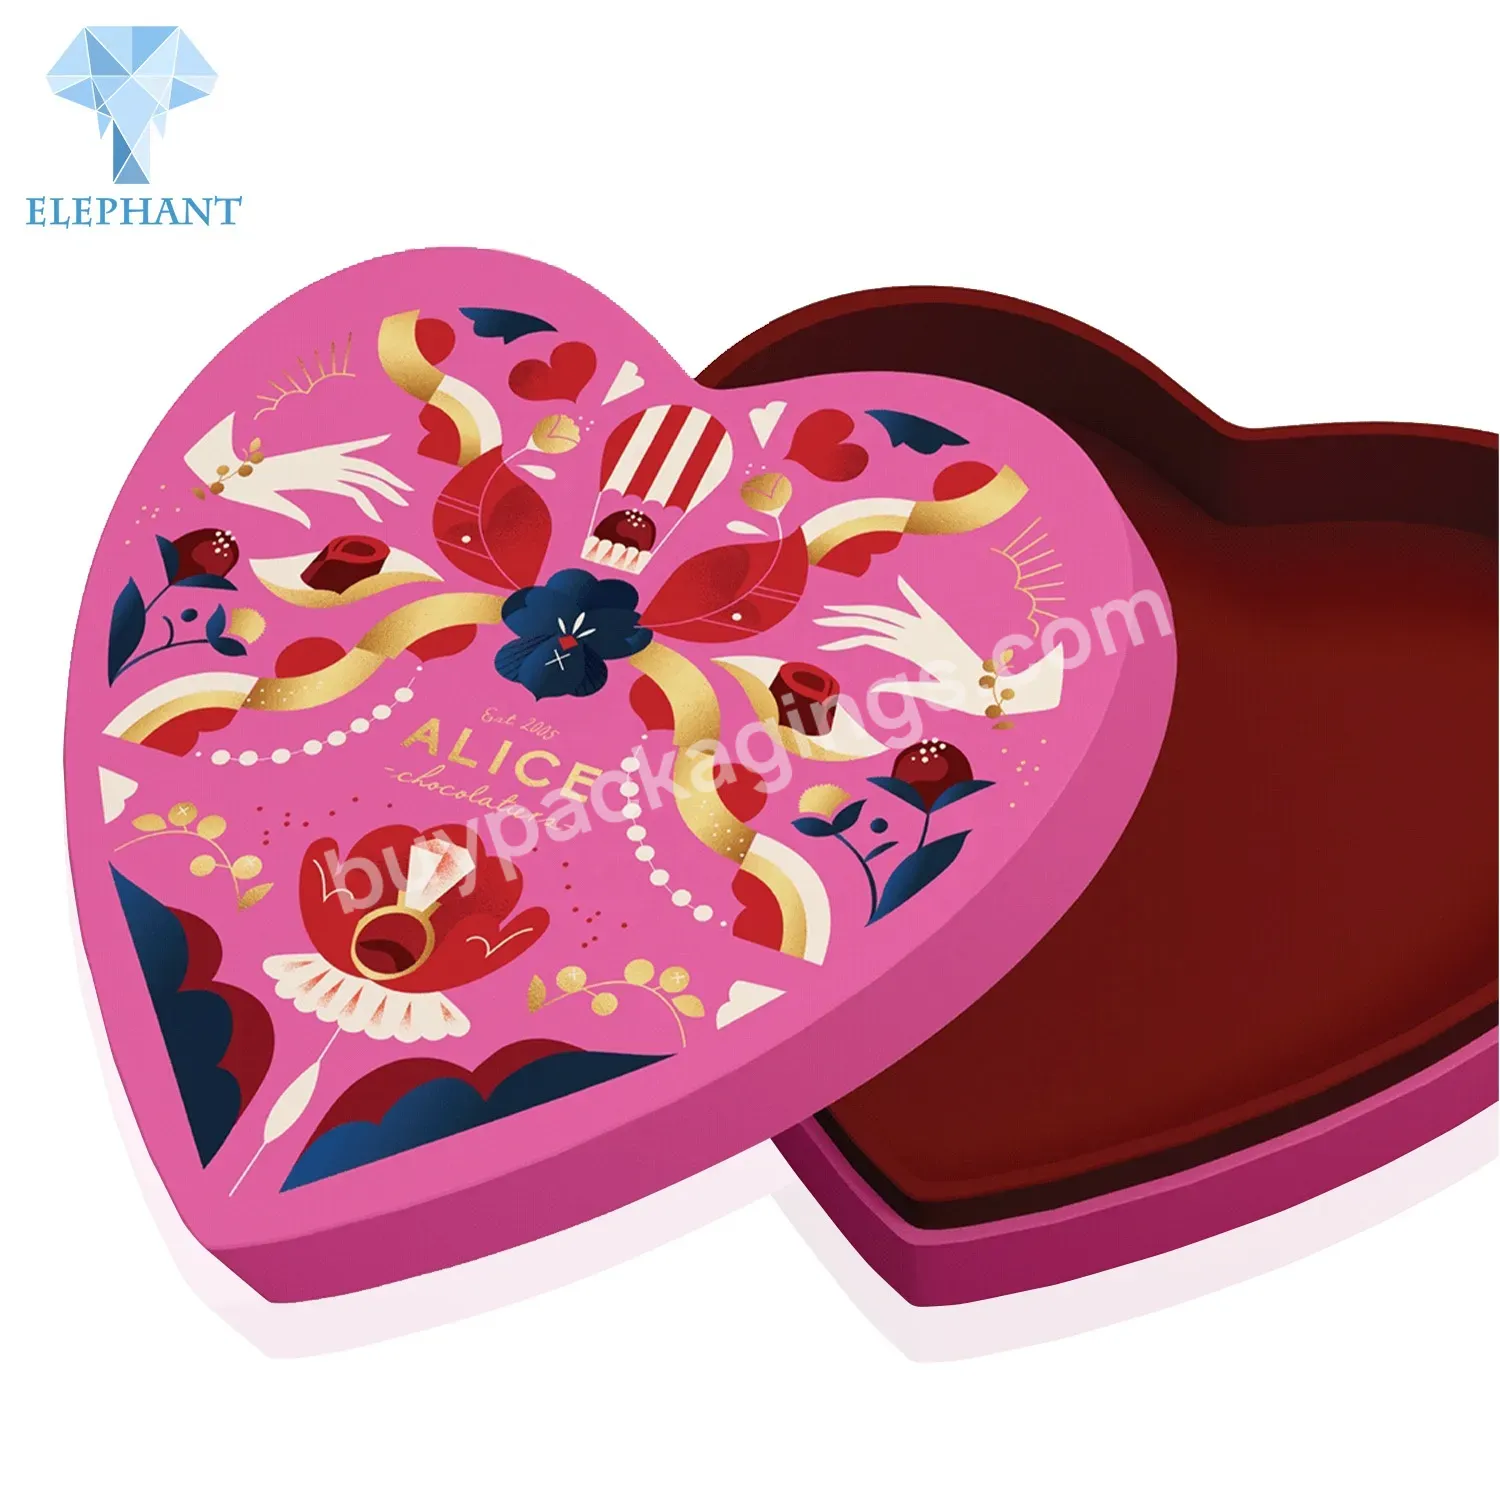 Wedding Favour Gift Box For Guest,Sweet Chocolate Candy Heart Shape Wedding Gift Box